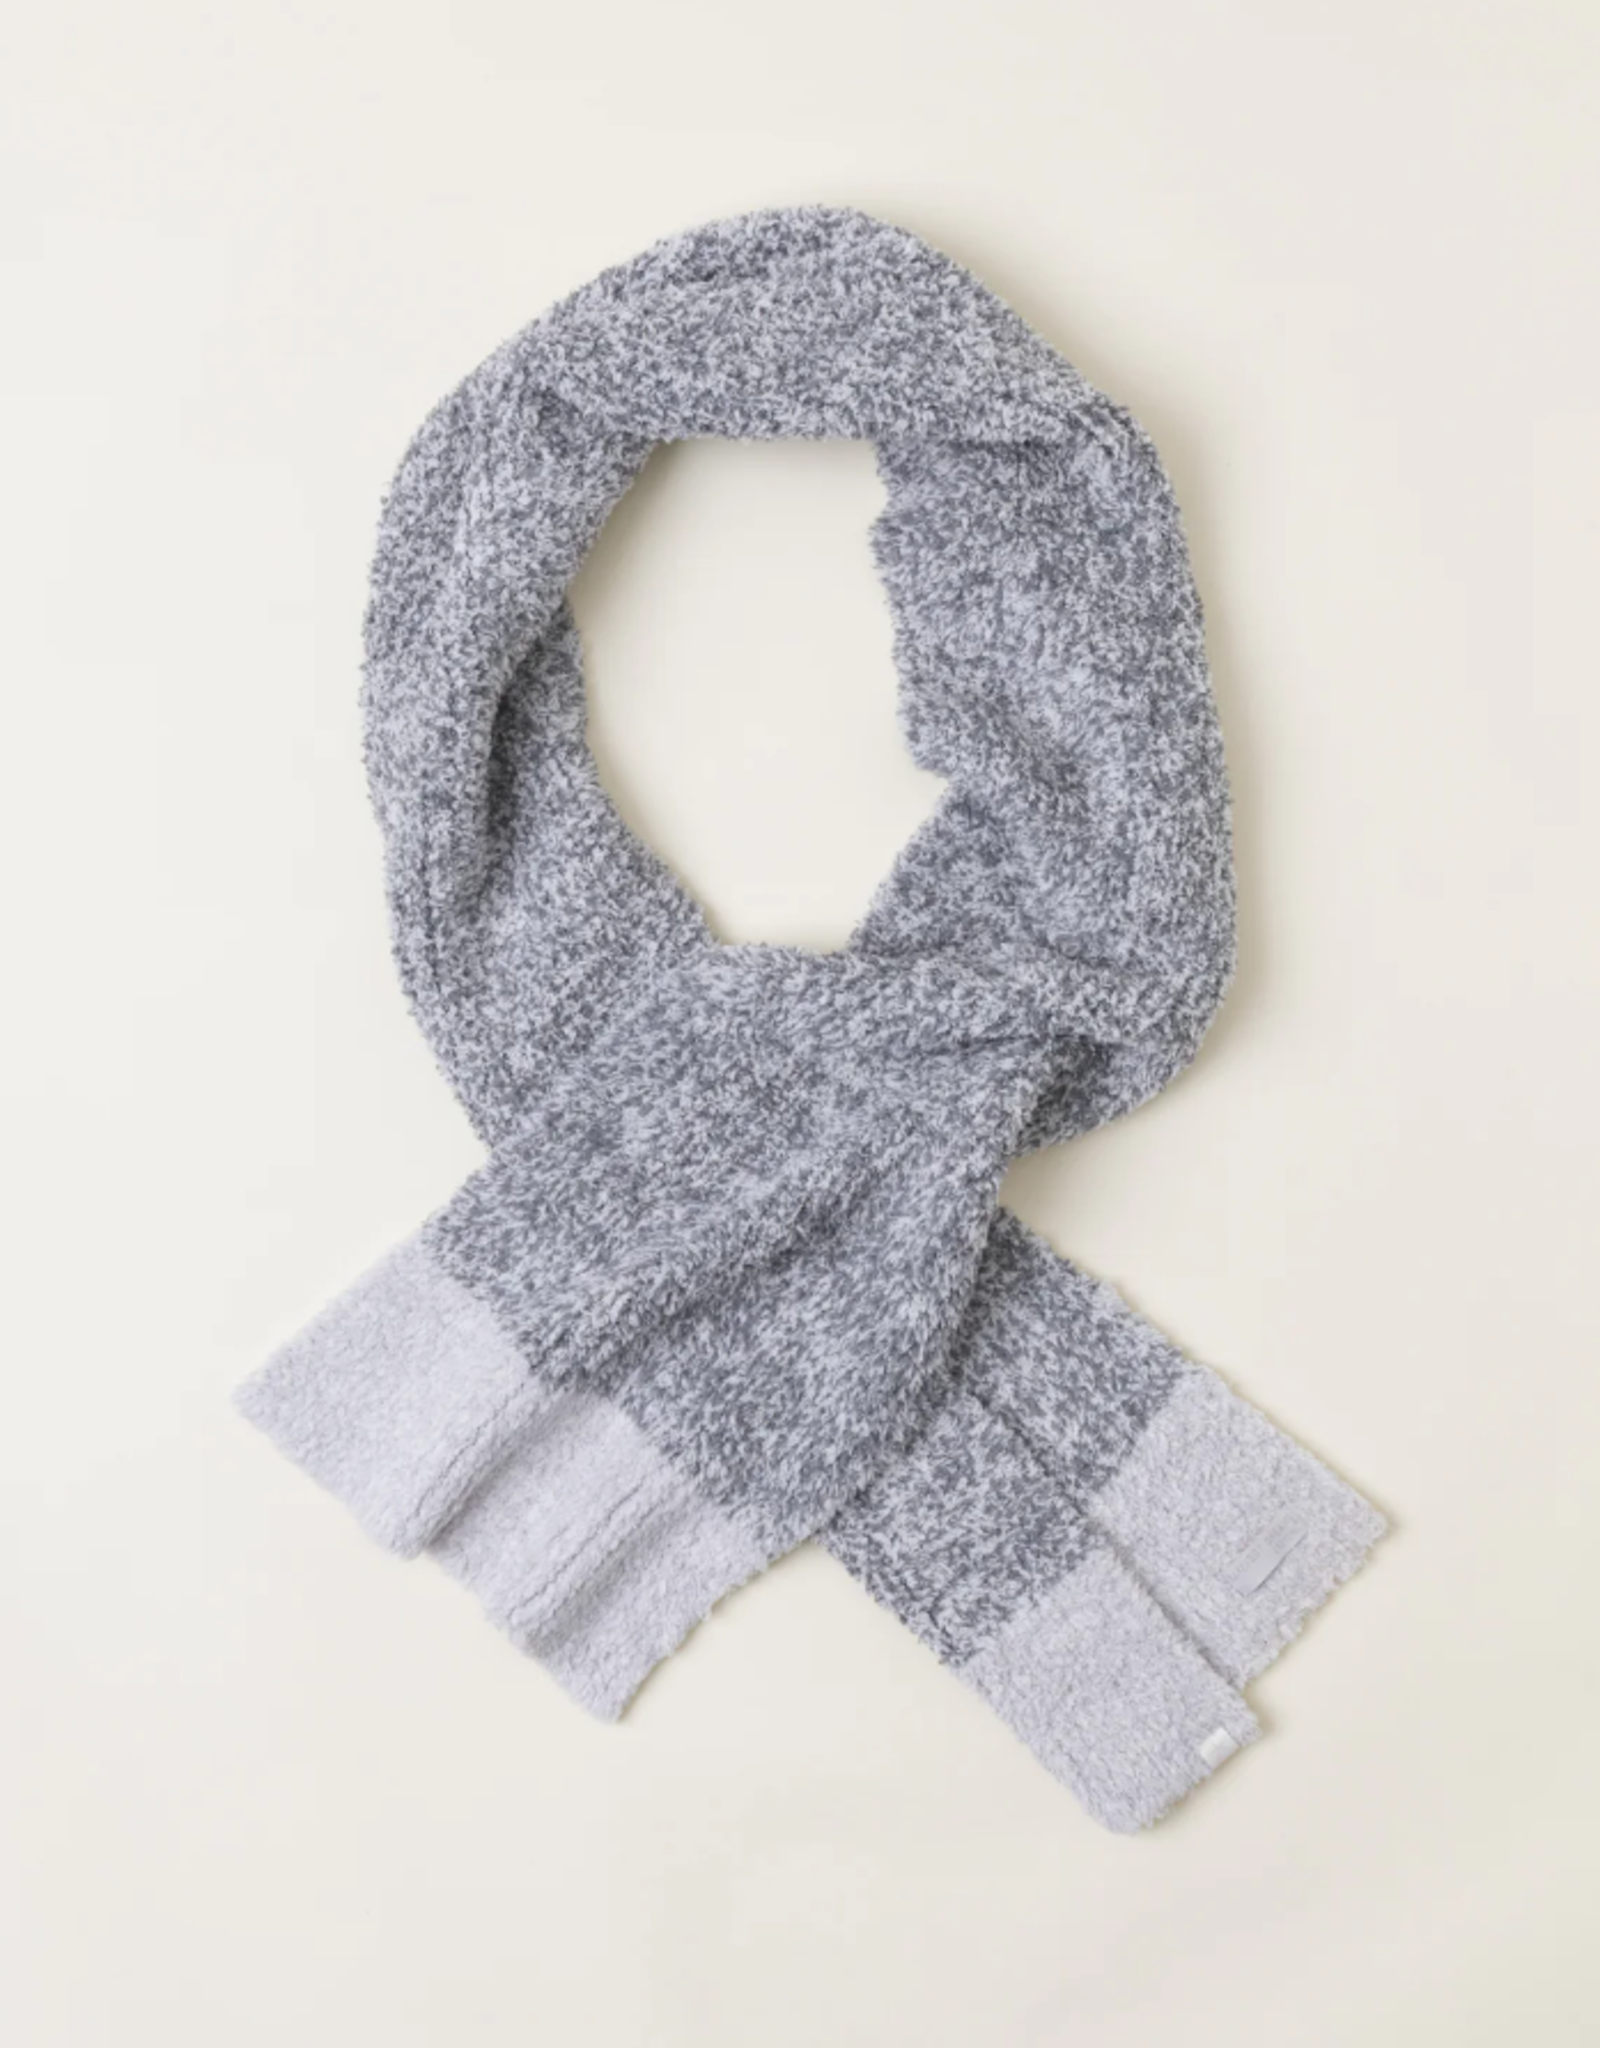 Barefoot Dreams CozyChic Heathered Tipped Scarf One Size |